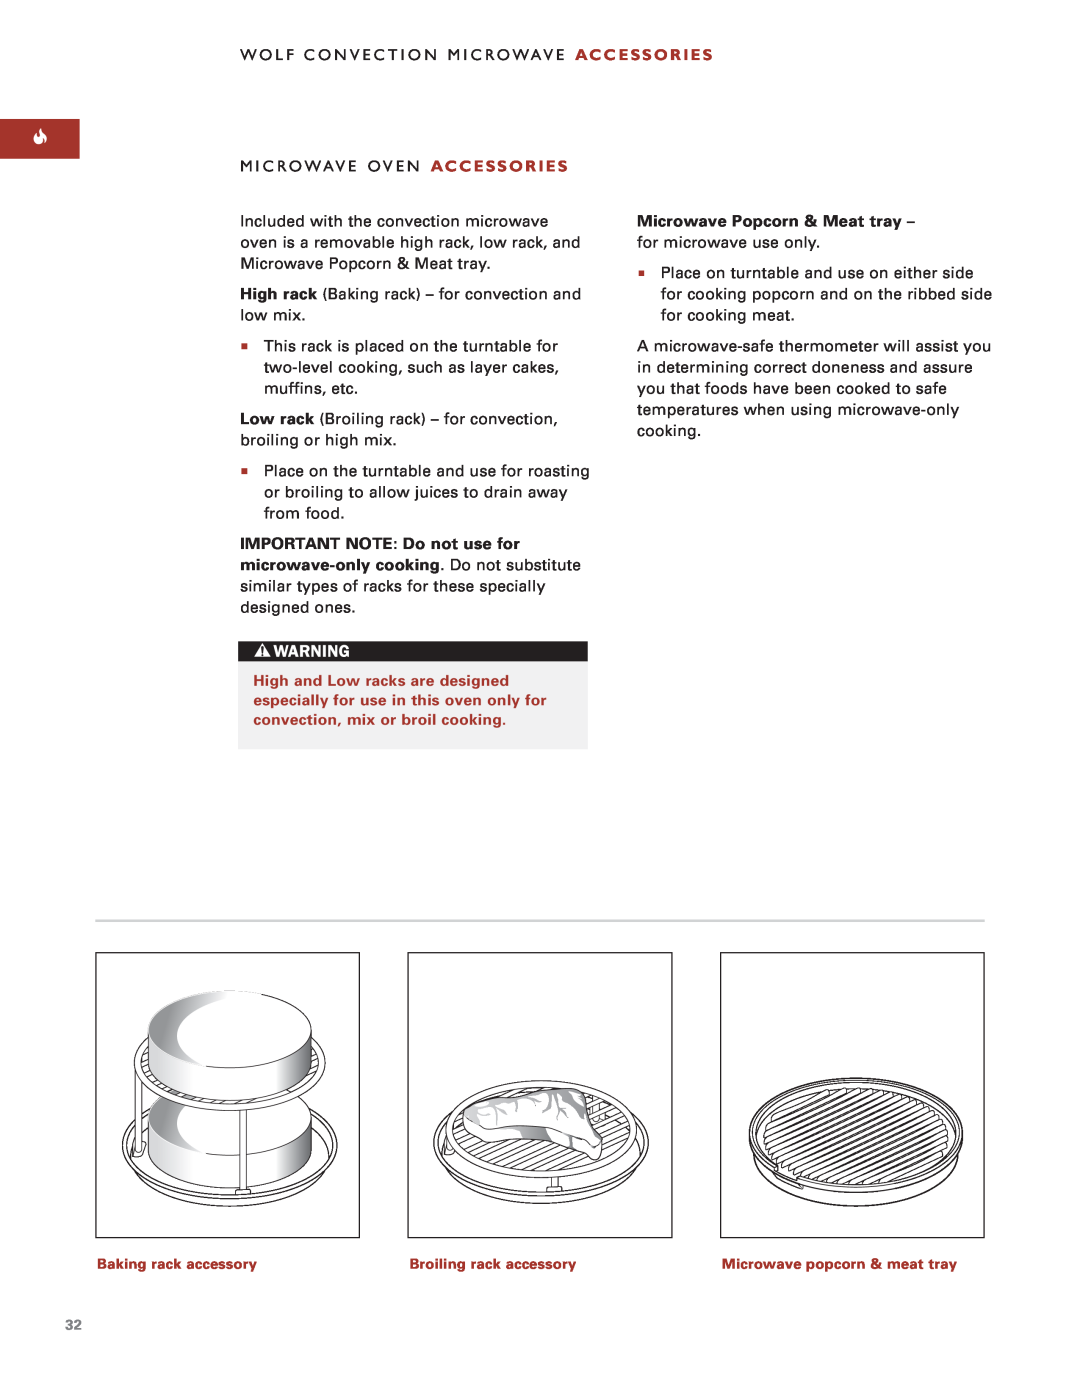 Sub-Zero Convection Microwave Oven manual Microwave Popcorn & Meat tray, IMPORTANT NOTE Do not use for 